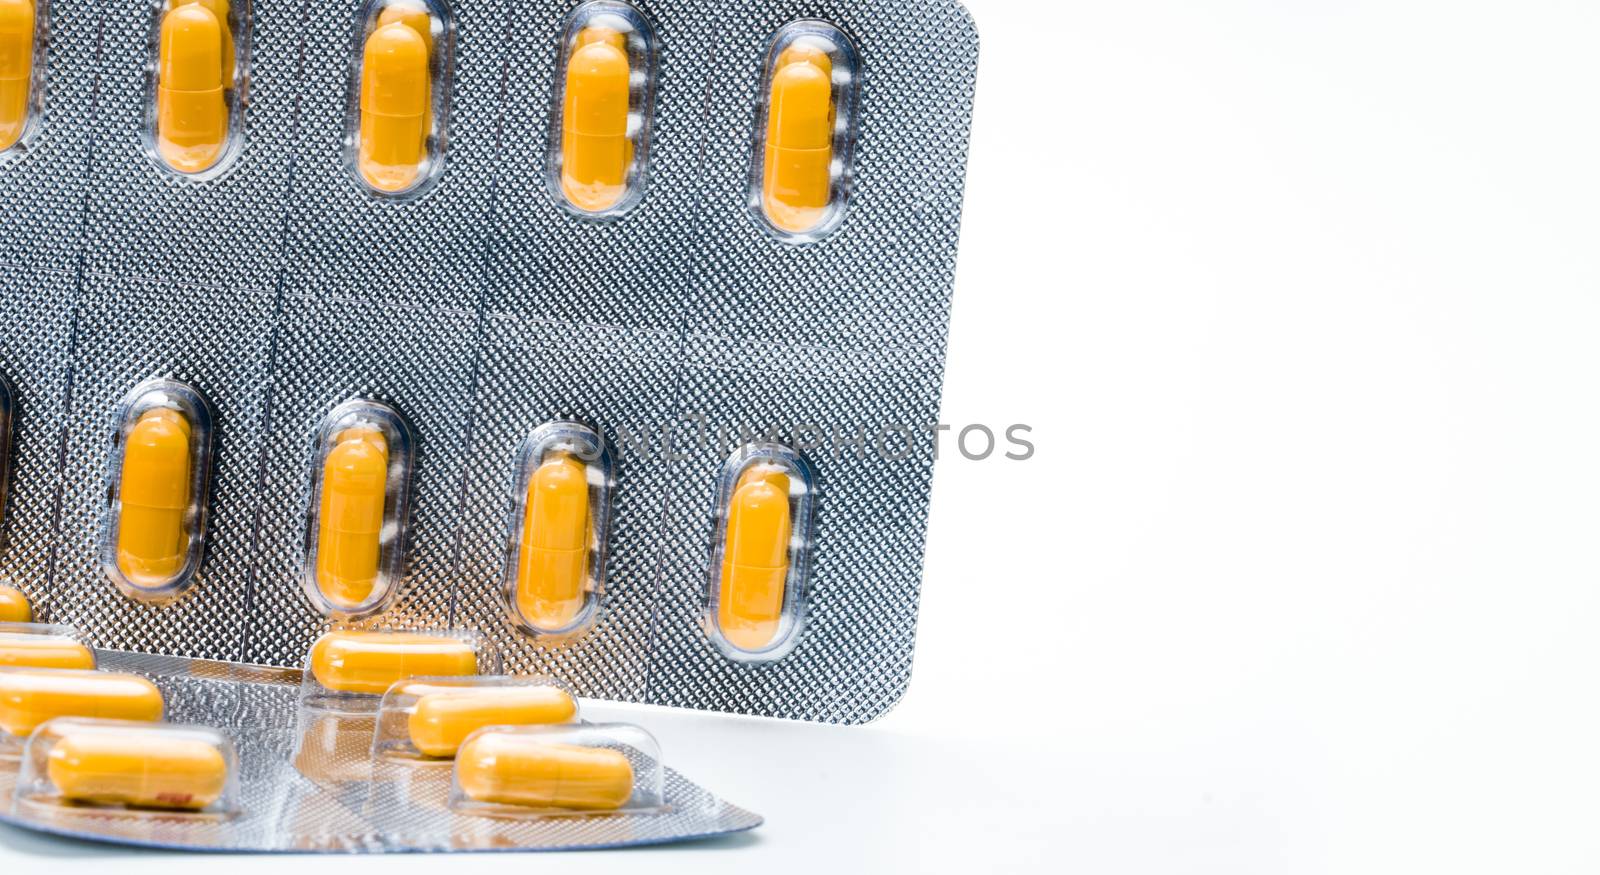 Orange capsule pills in blister pack isolated on white background with copy space for text. Antibiotics drug resistance and antimicrobial drug use with reasonable concept. Global healthcare. Pharmaceutical packaging industry. Pharmacy background.